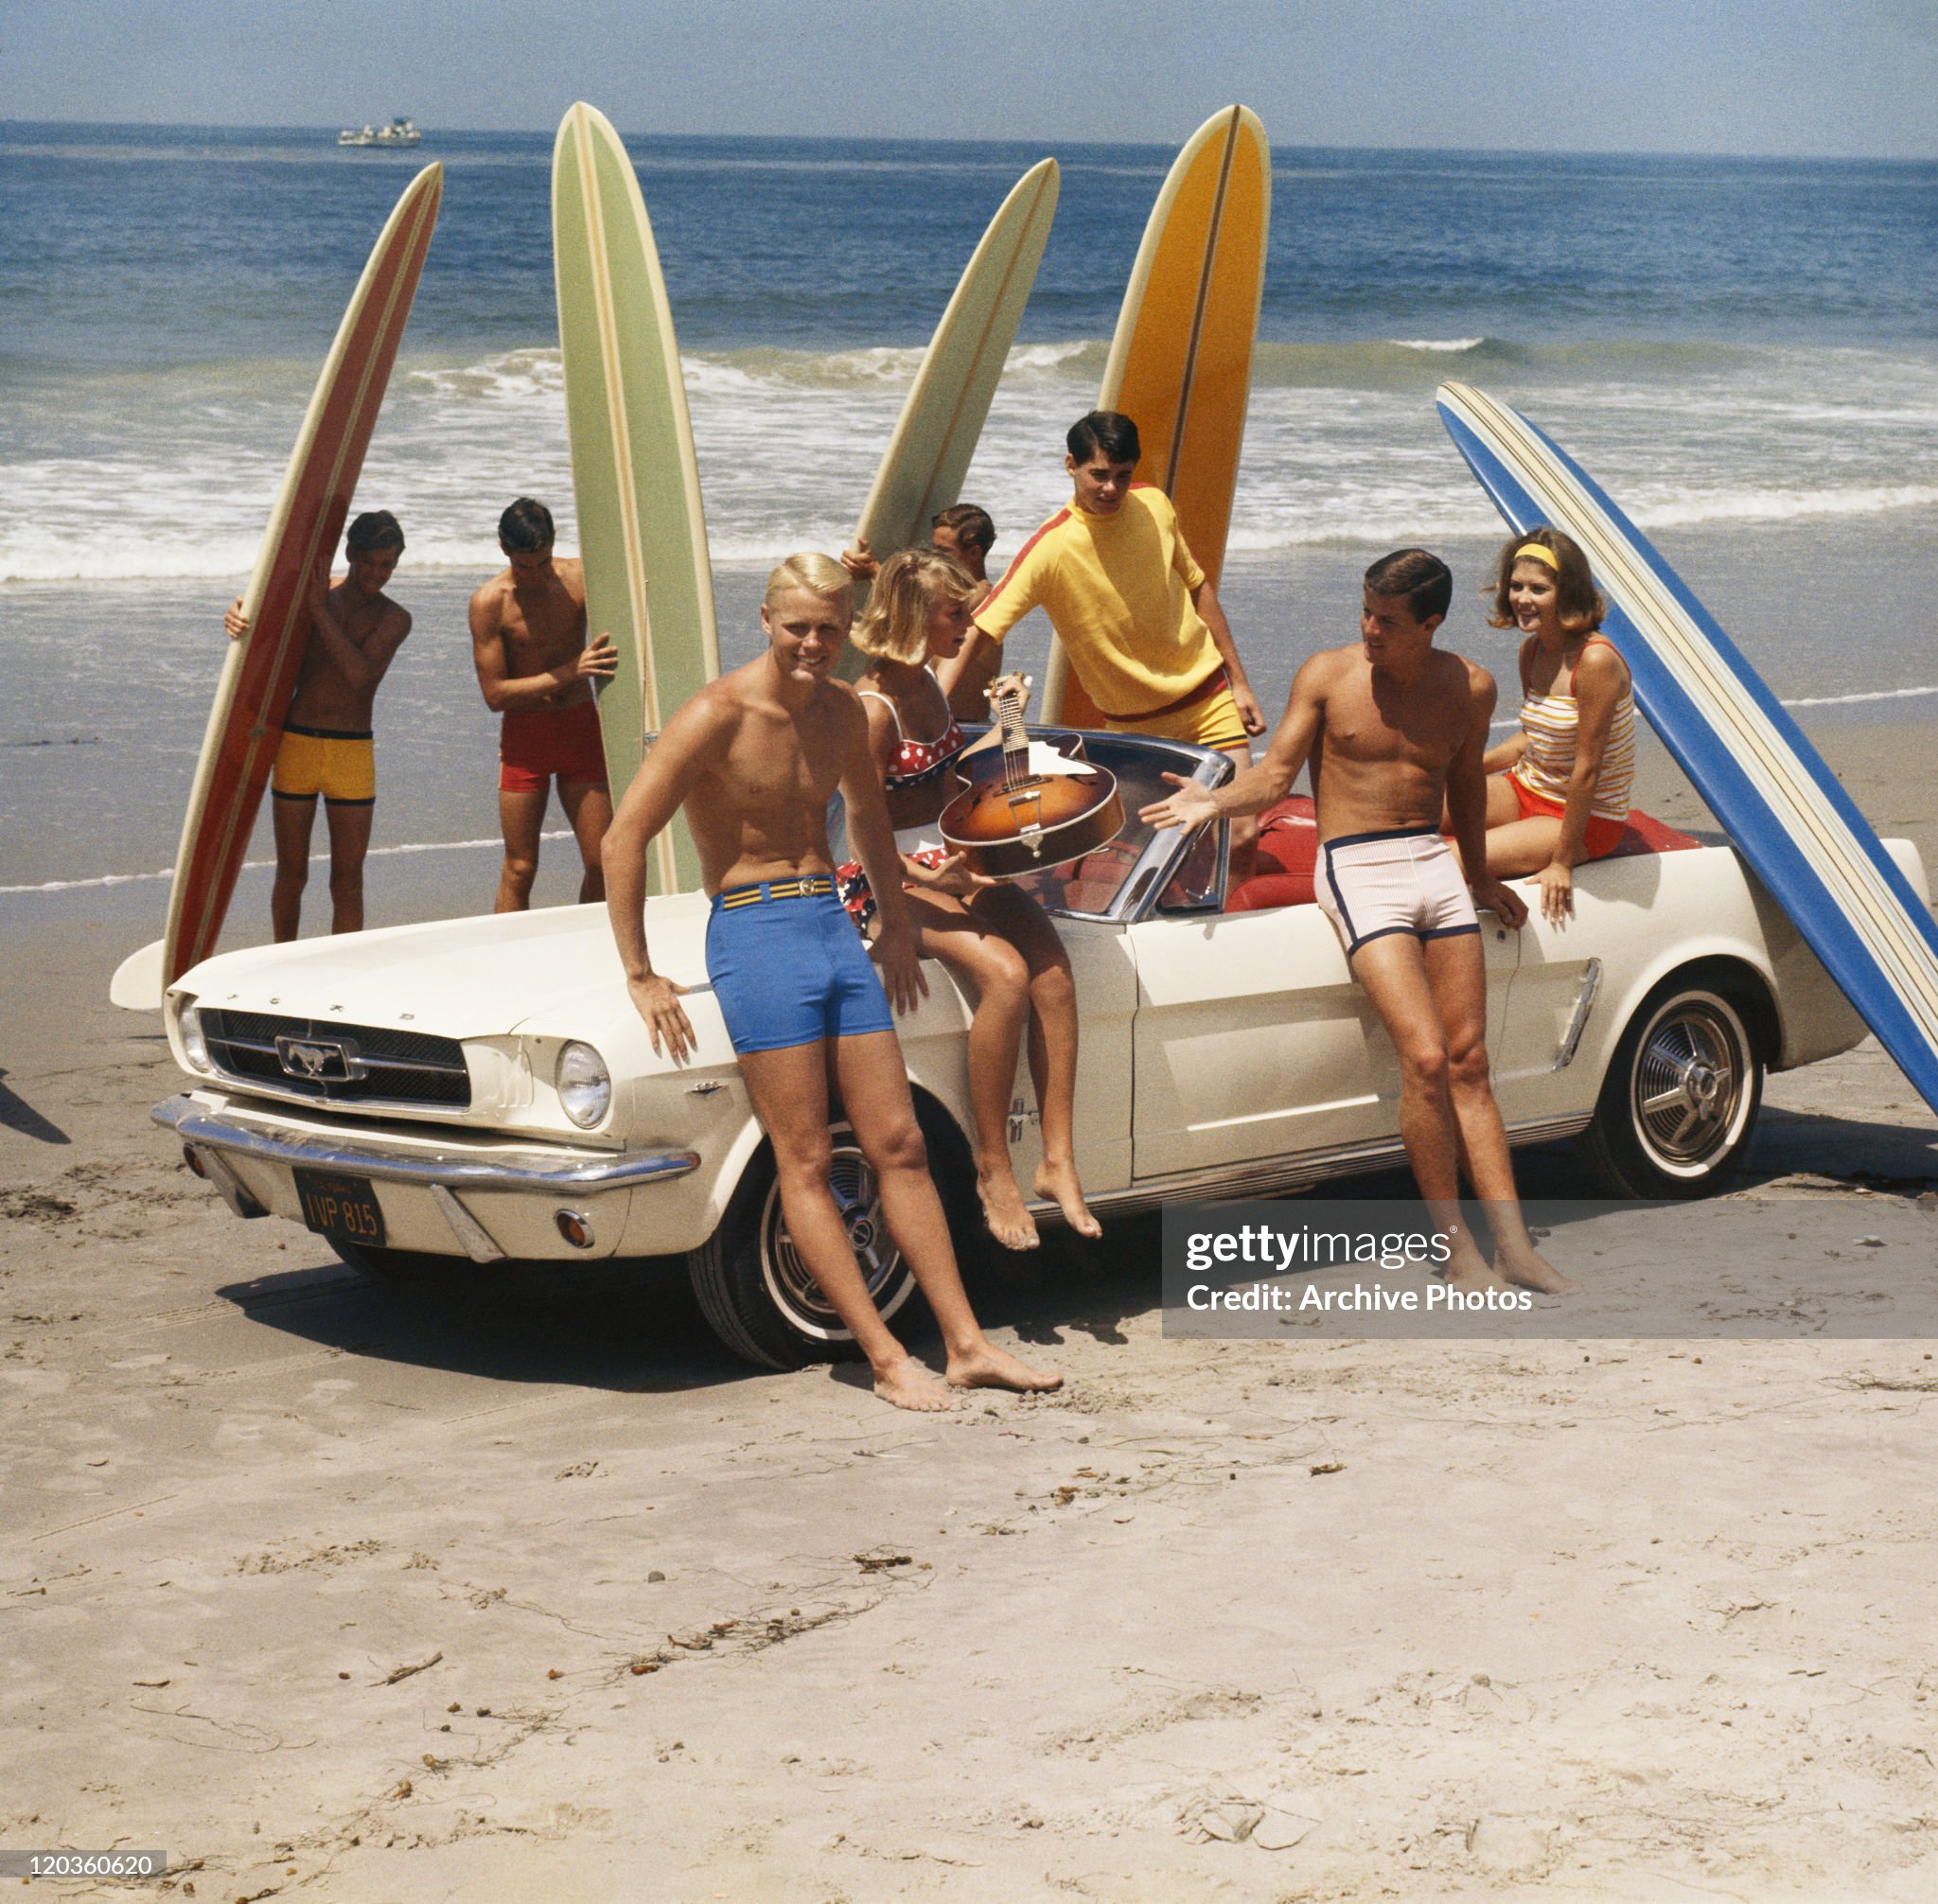 A group of surfers on a beach with a Ford Mustang car in 1968.